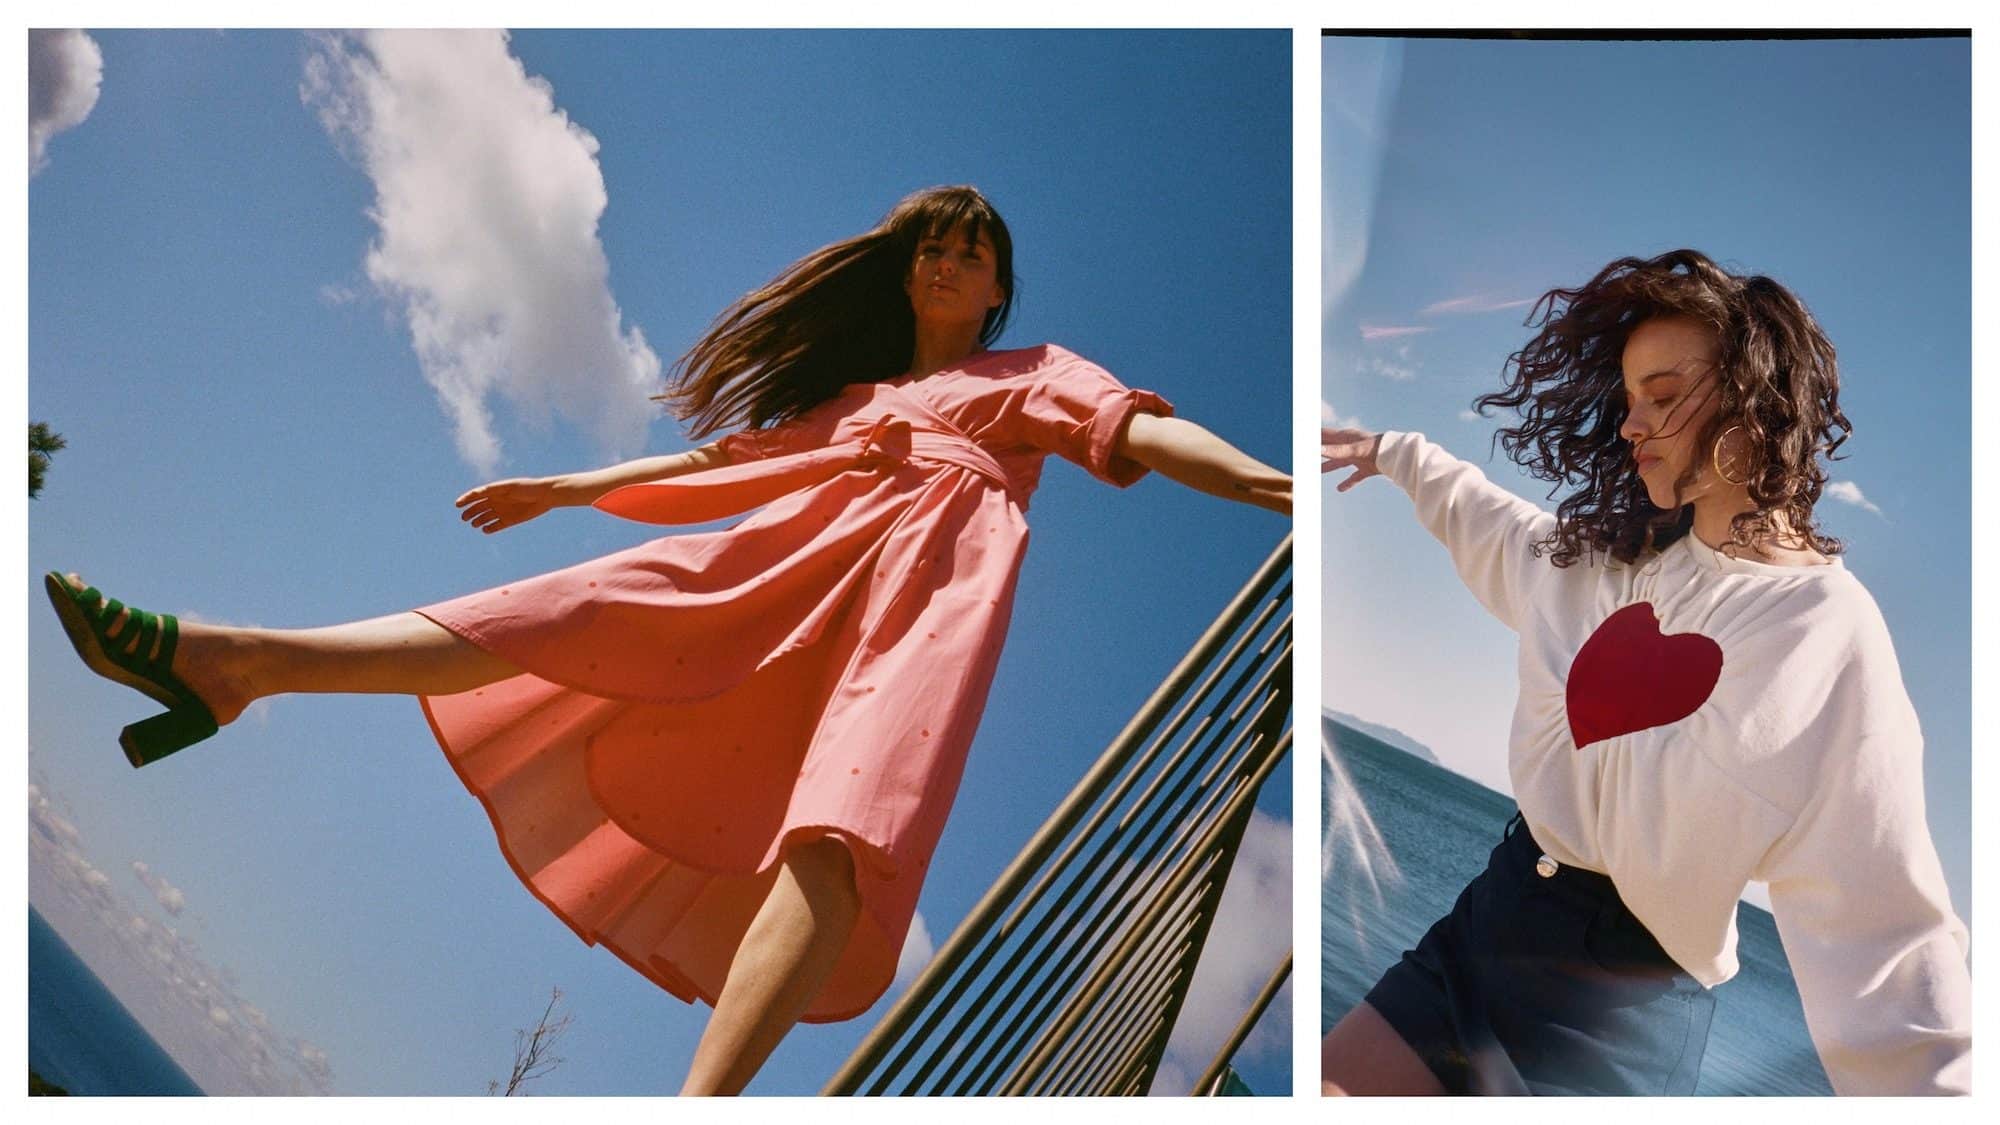 What to buy to look like a Parisian? Anything from Make My Lemonade, a fashion brand Parisians love for its retro cuts like this coral cotton dress (left) and heart-print white sweater (right).